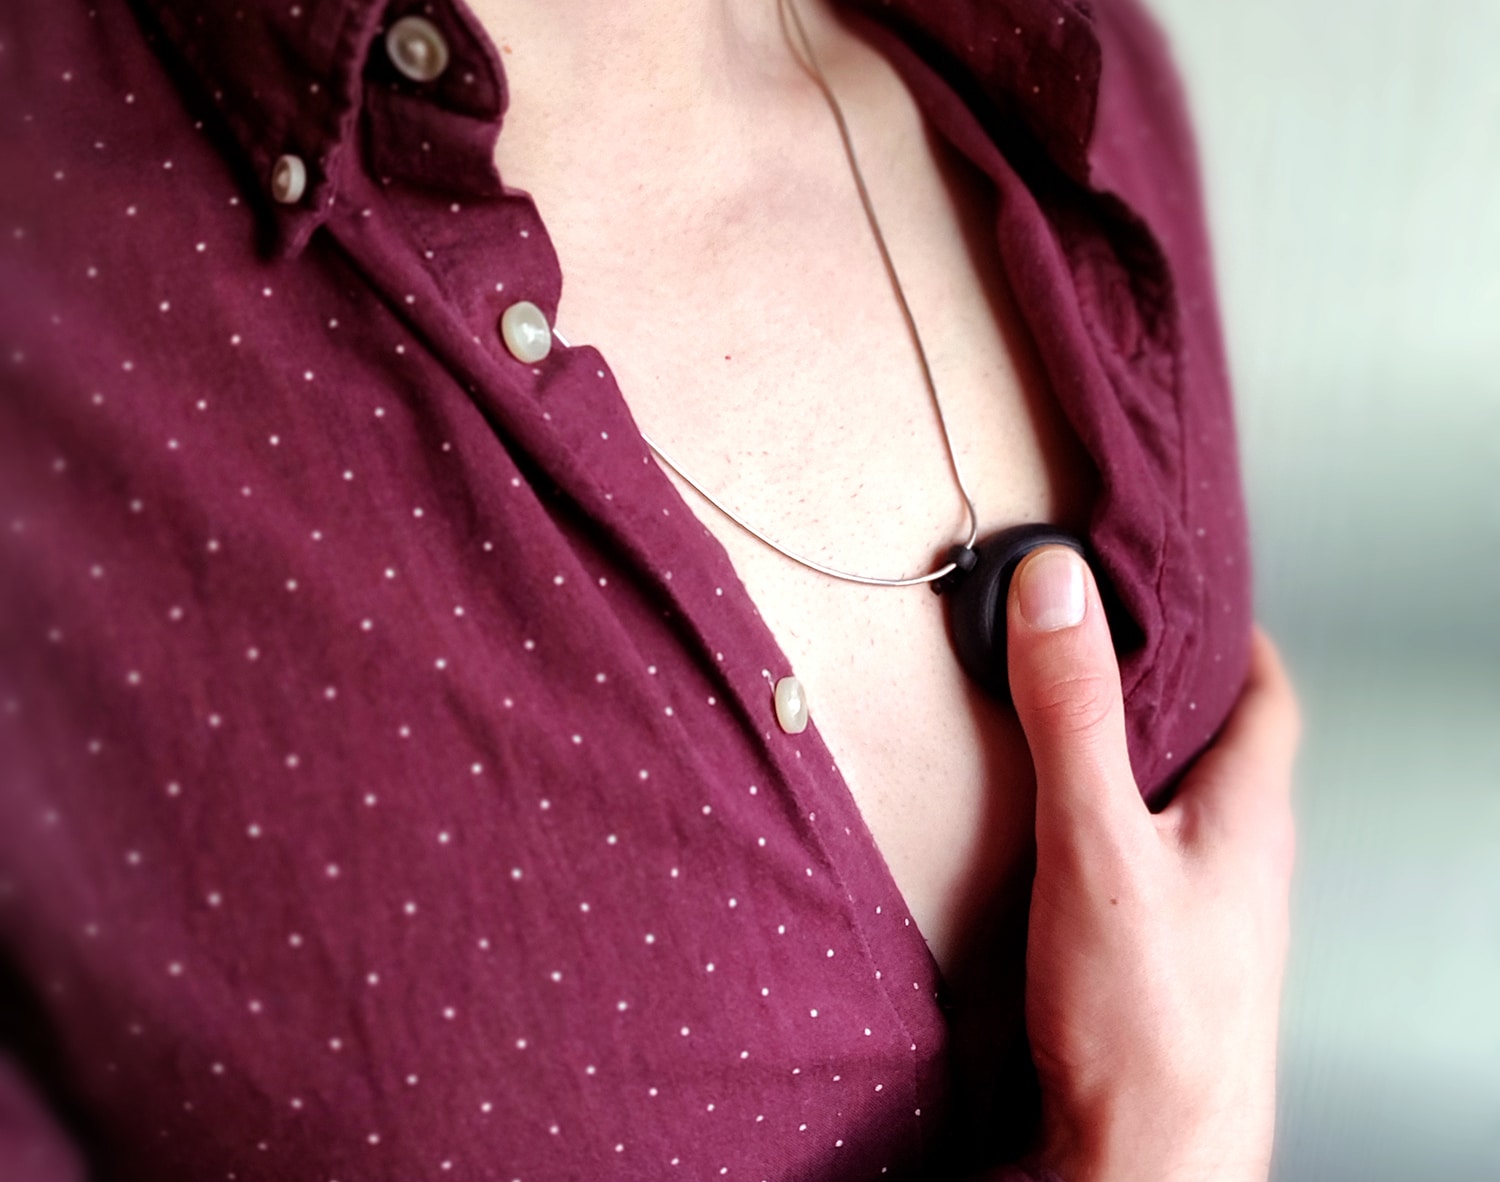 The necklace-ECG for quick and easy check of the heart.